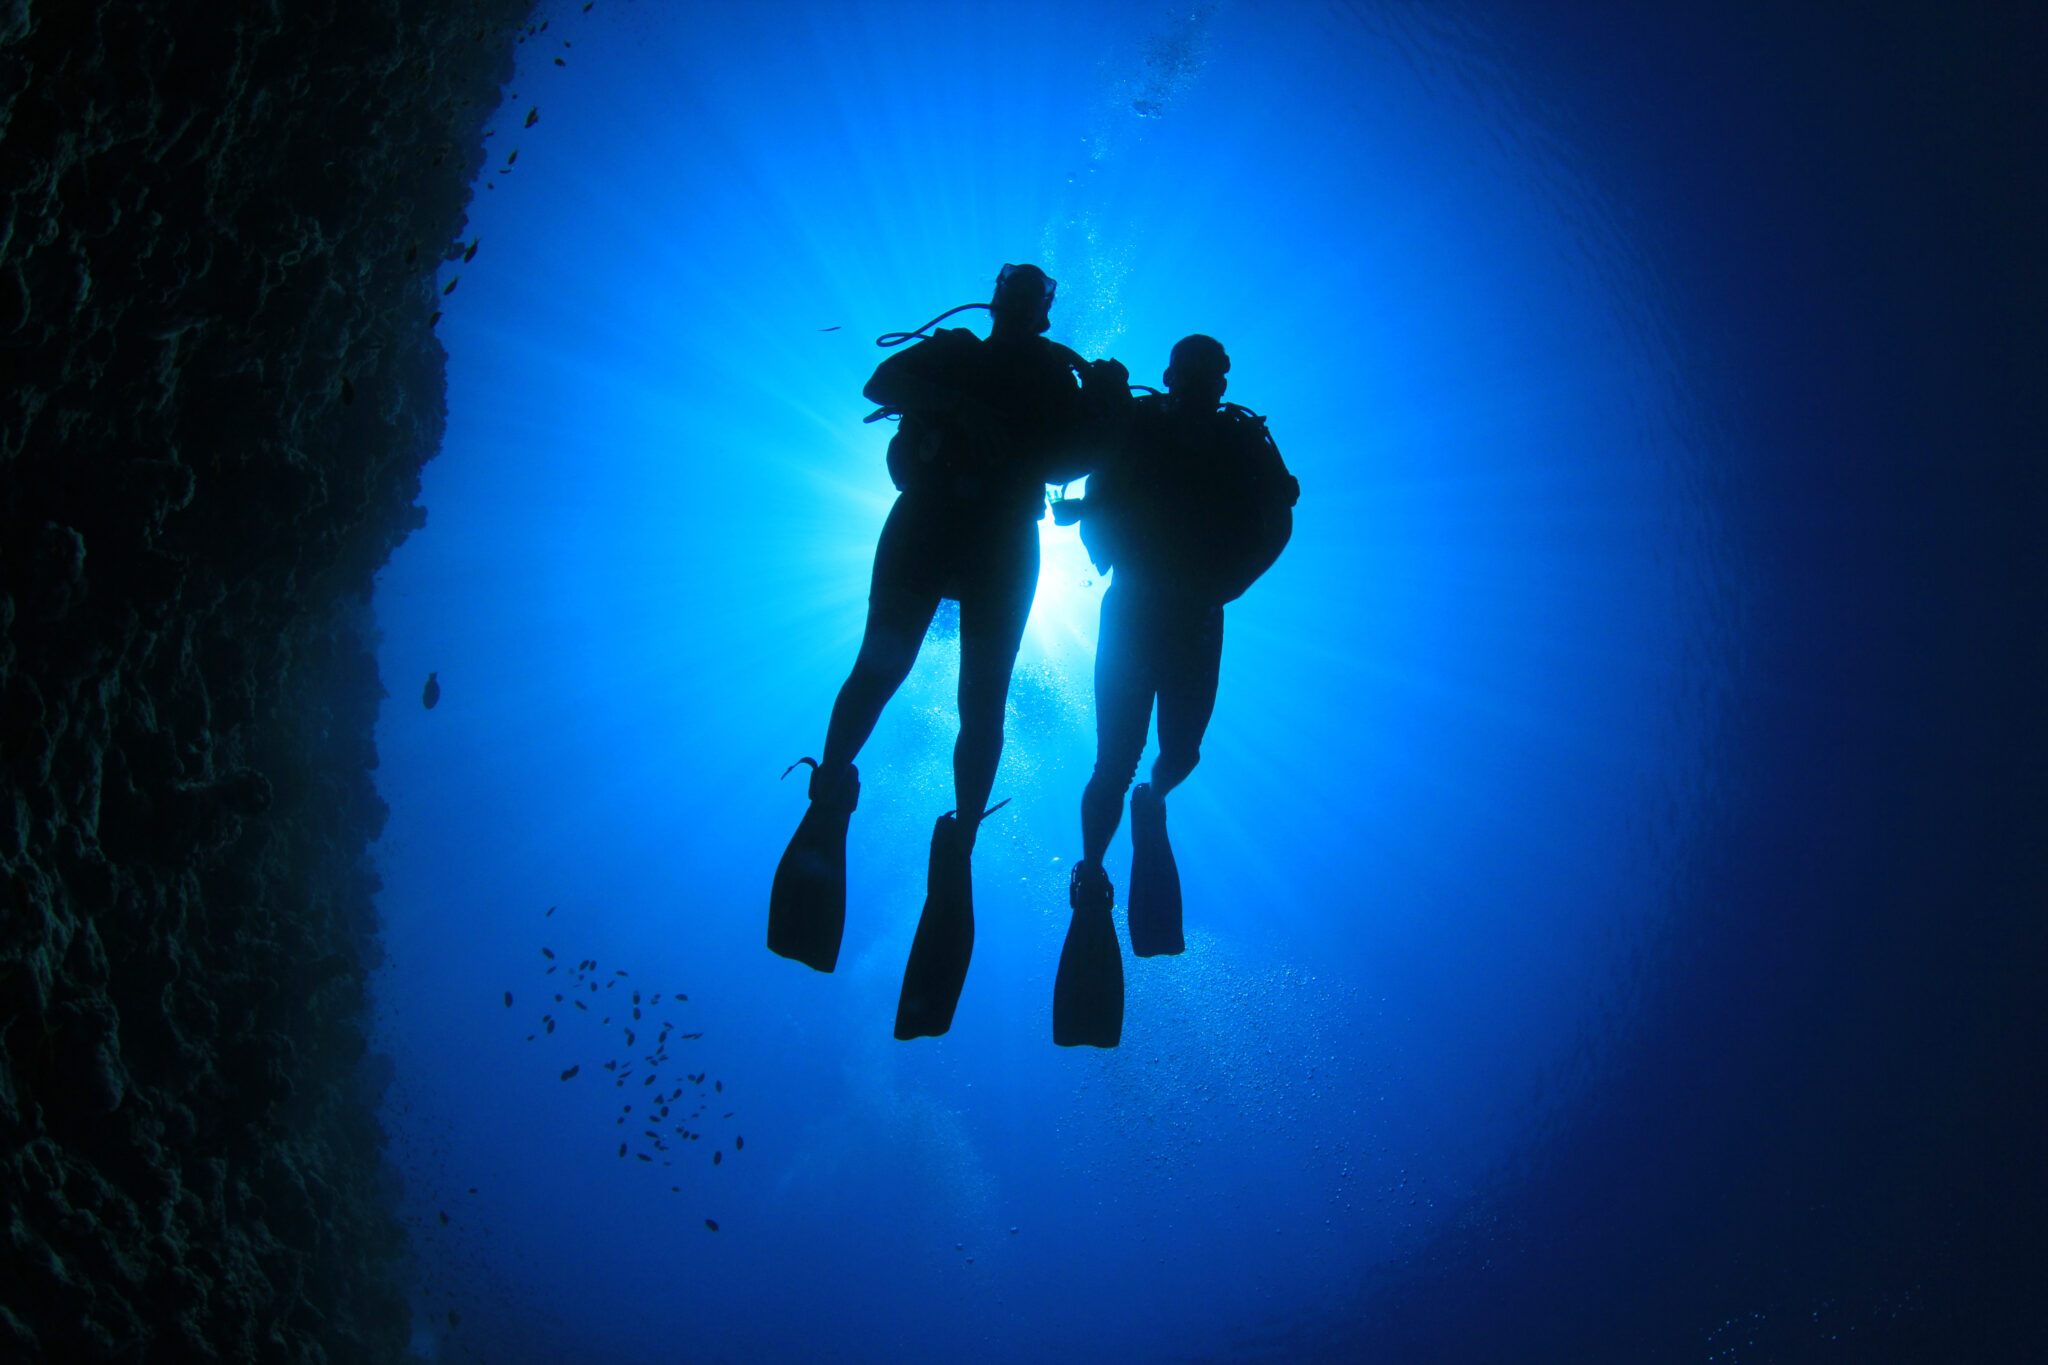 The silhouette of two scuba divers underwater, who may also be dating after using one of many ocean themed pick up lines